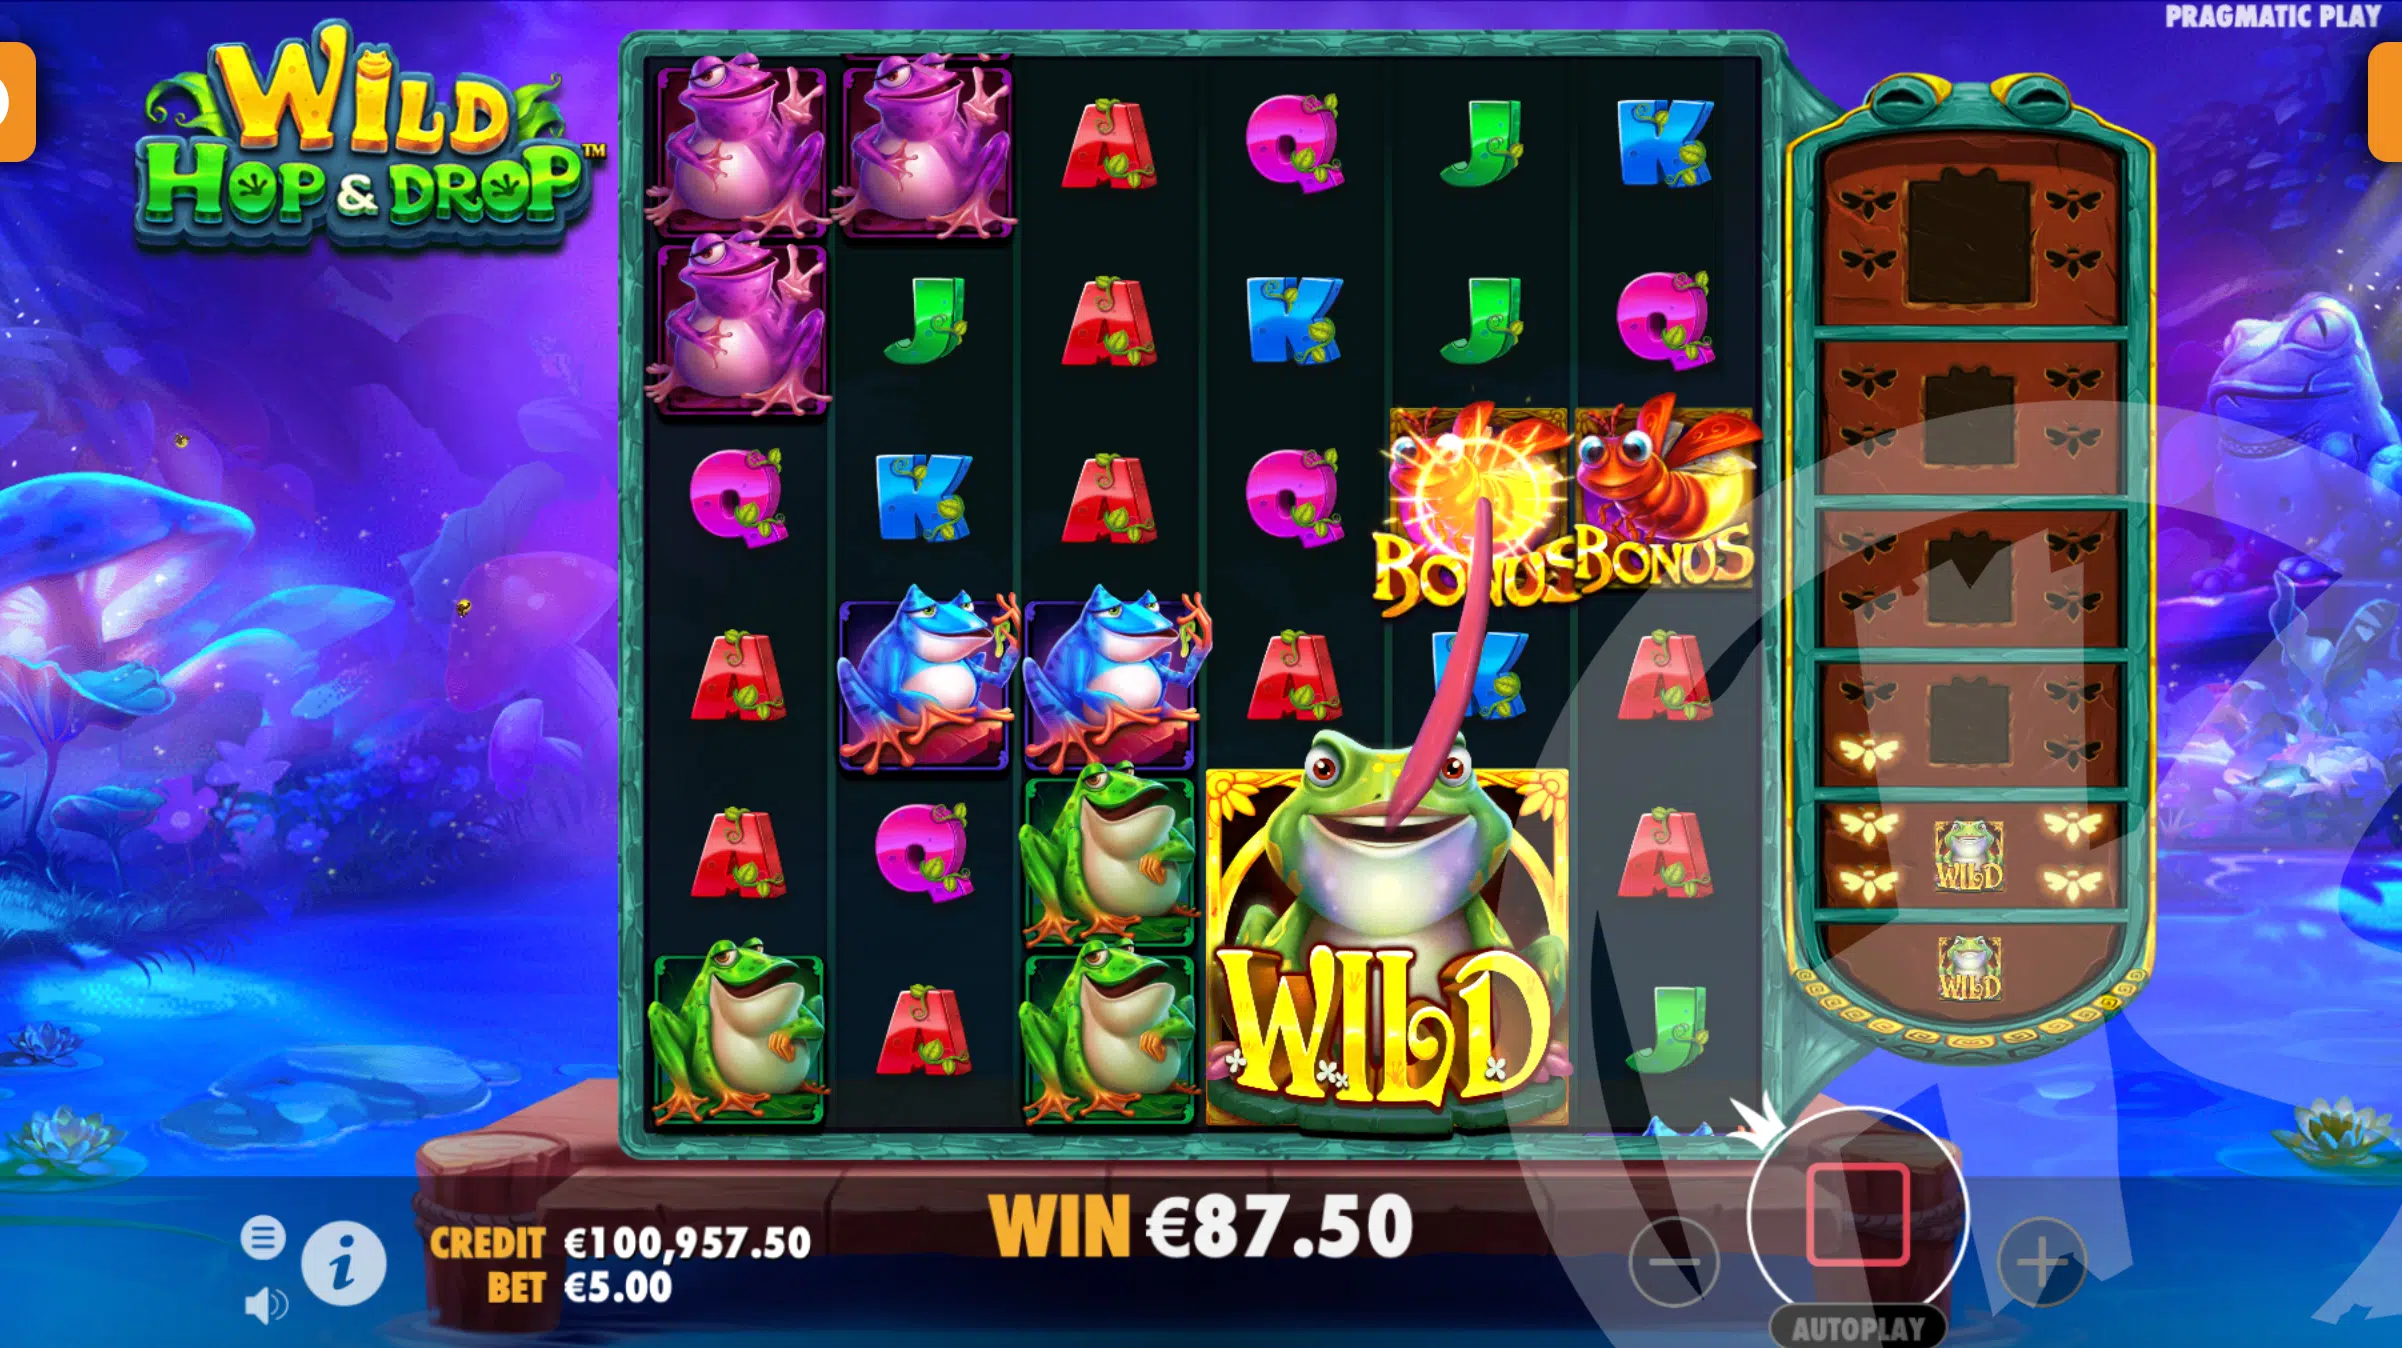 Bonus Symbols are Collected During Free Spins, To Increase the Size of the Wild Symbol